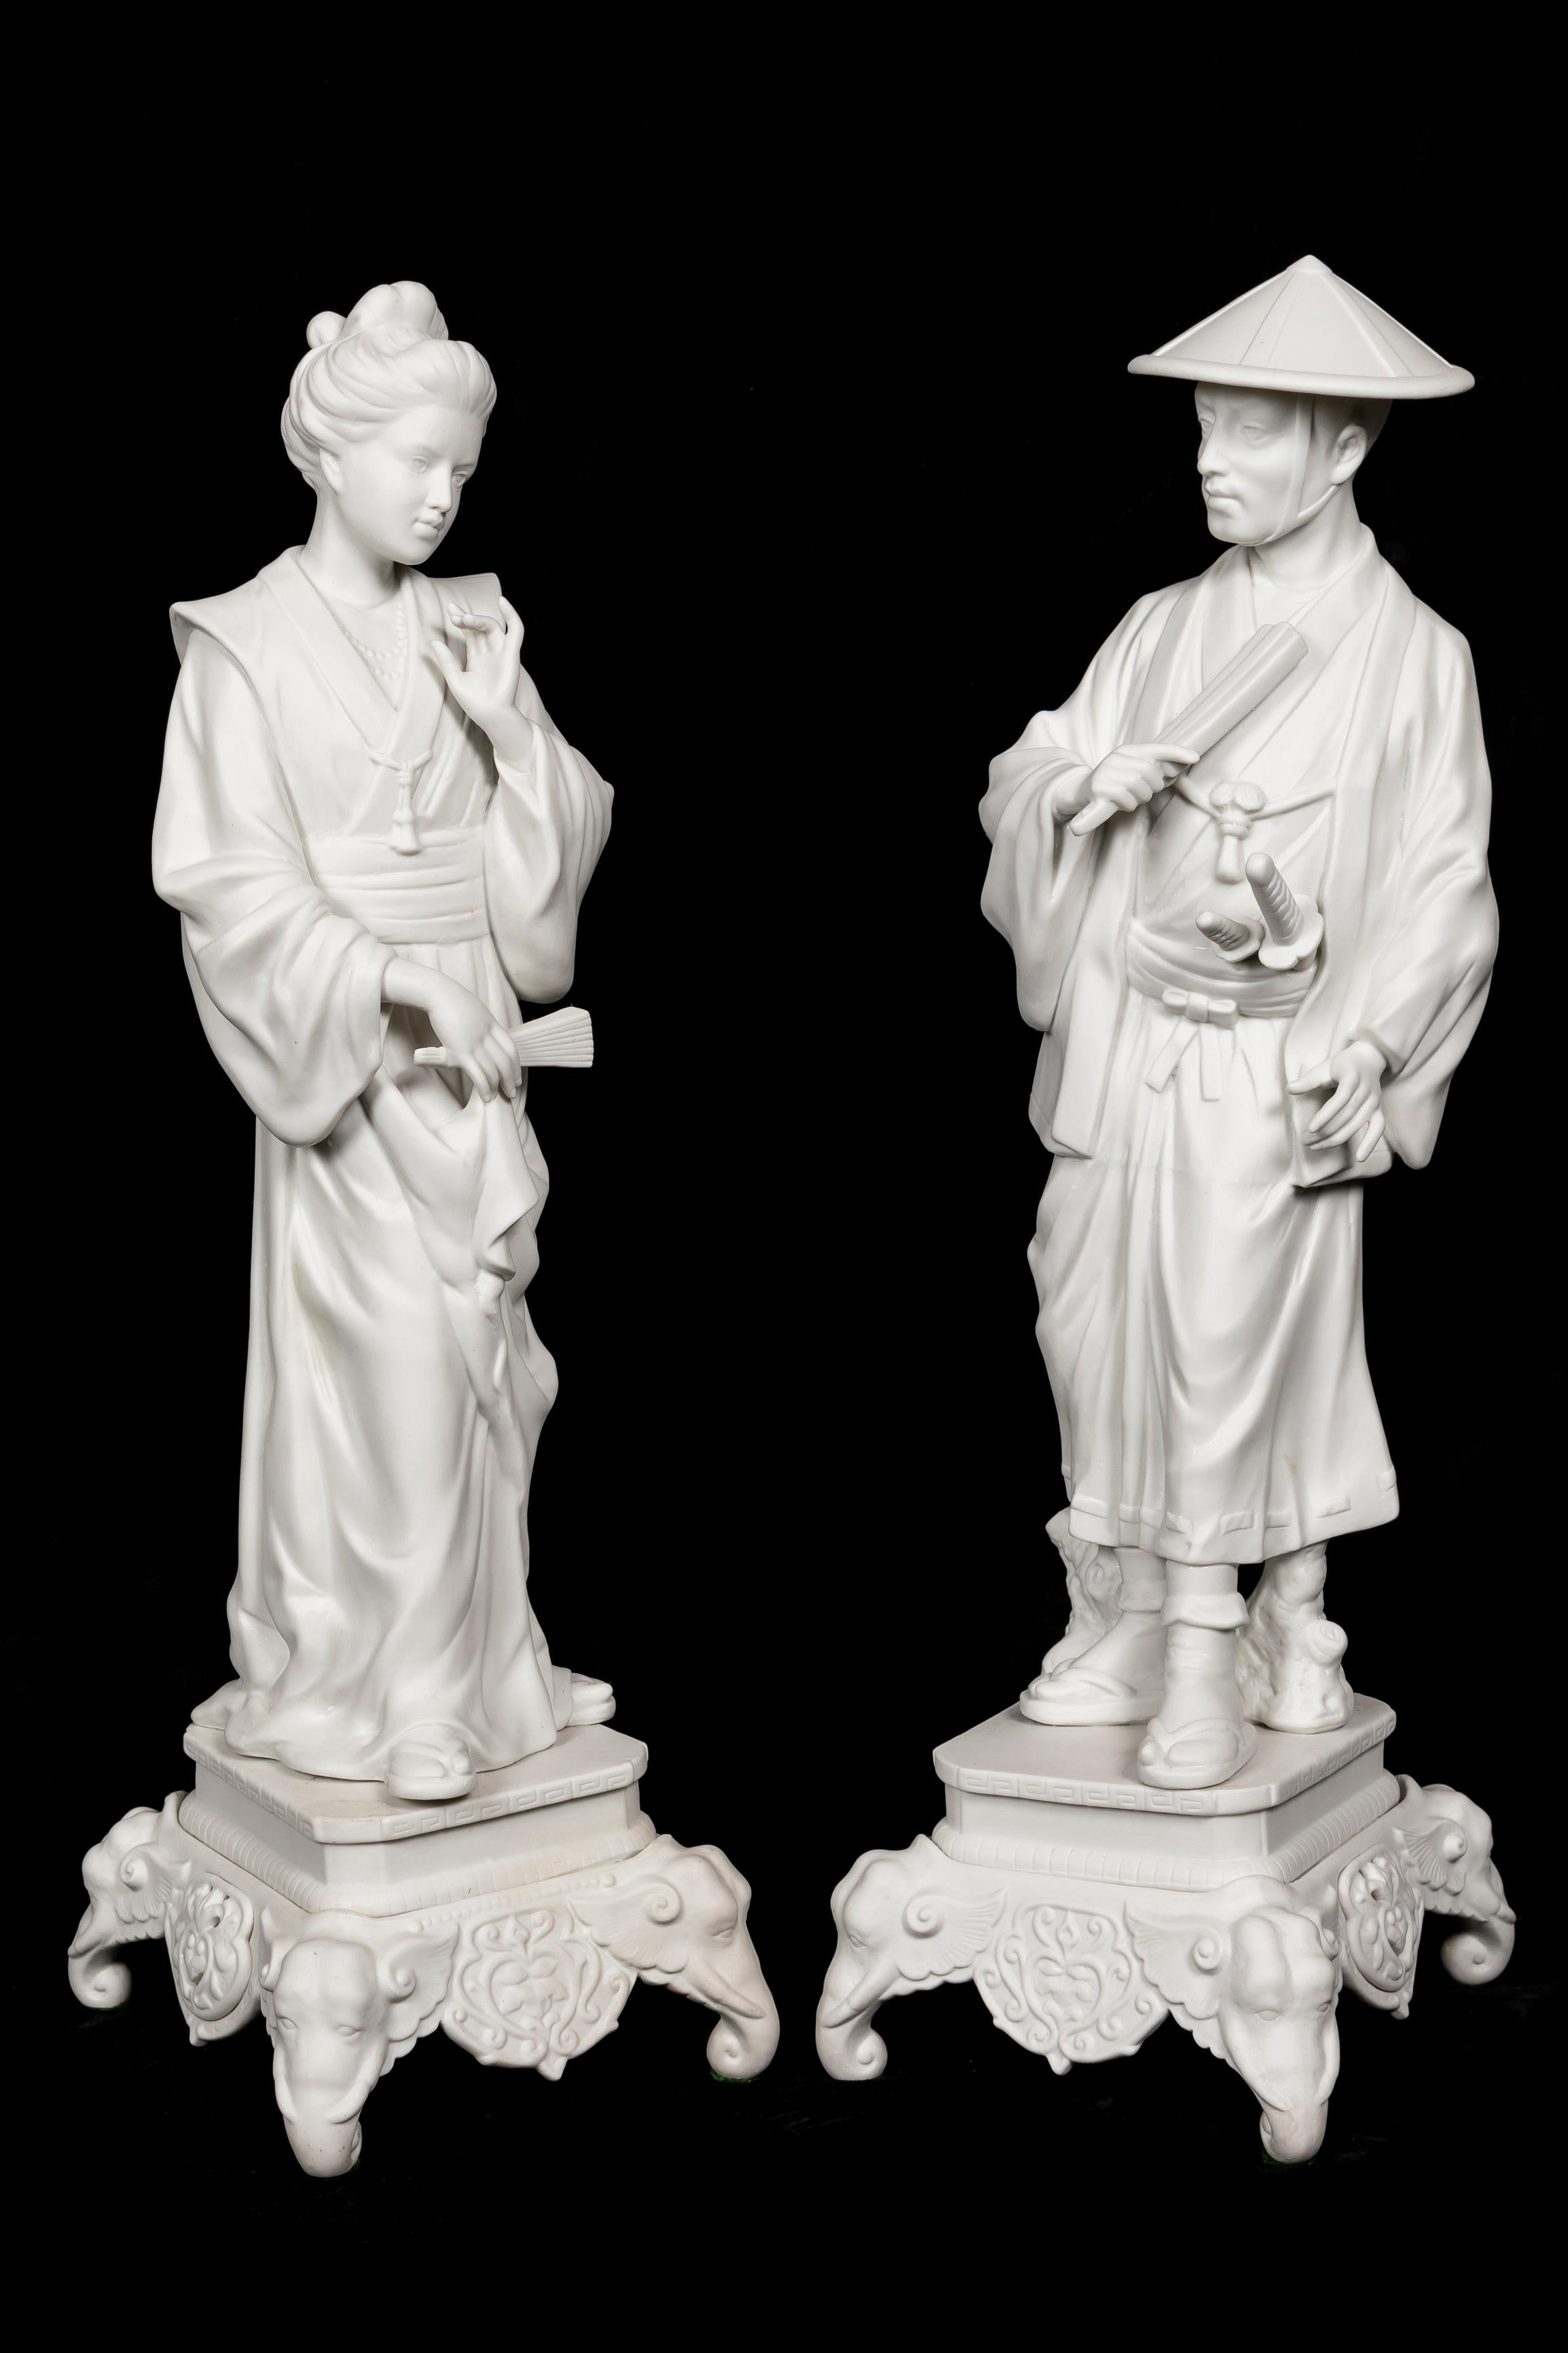 A Pair of Spectacular and Large Antique French Chinoiserie Style white porcelain figures of a male and female figure. Both modelled in white bisque porcelain of chinoiserie style wearing robes and holding fans on square bases embellished with